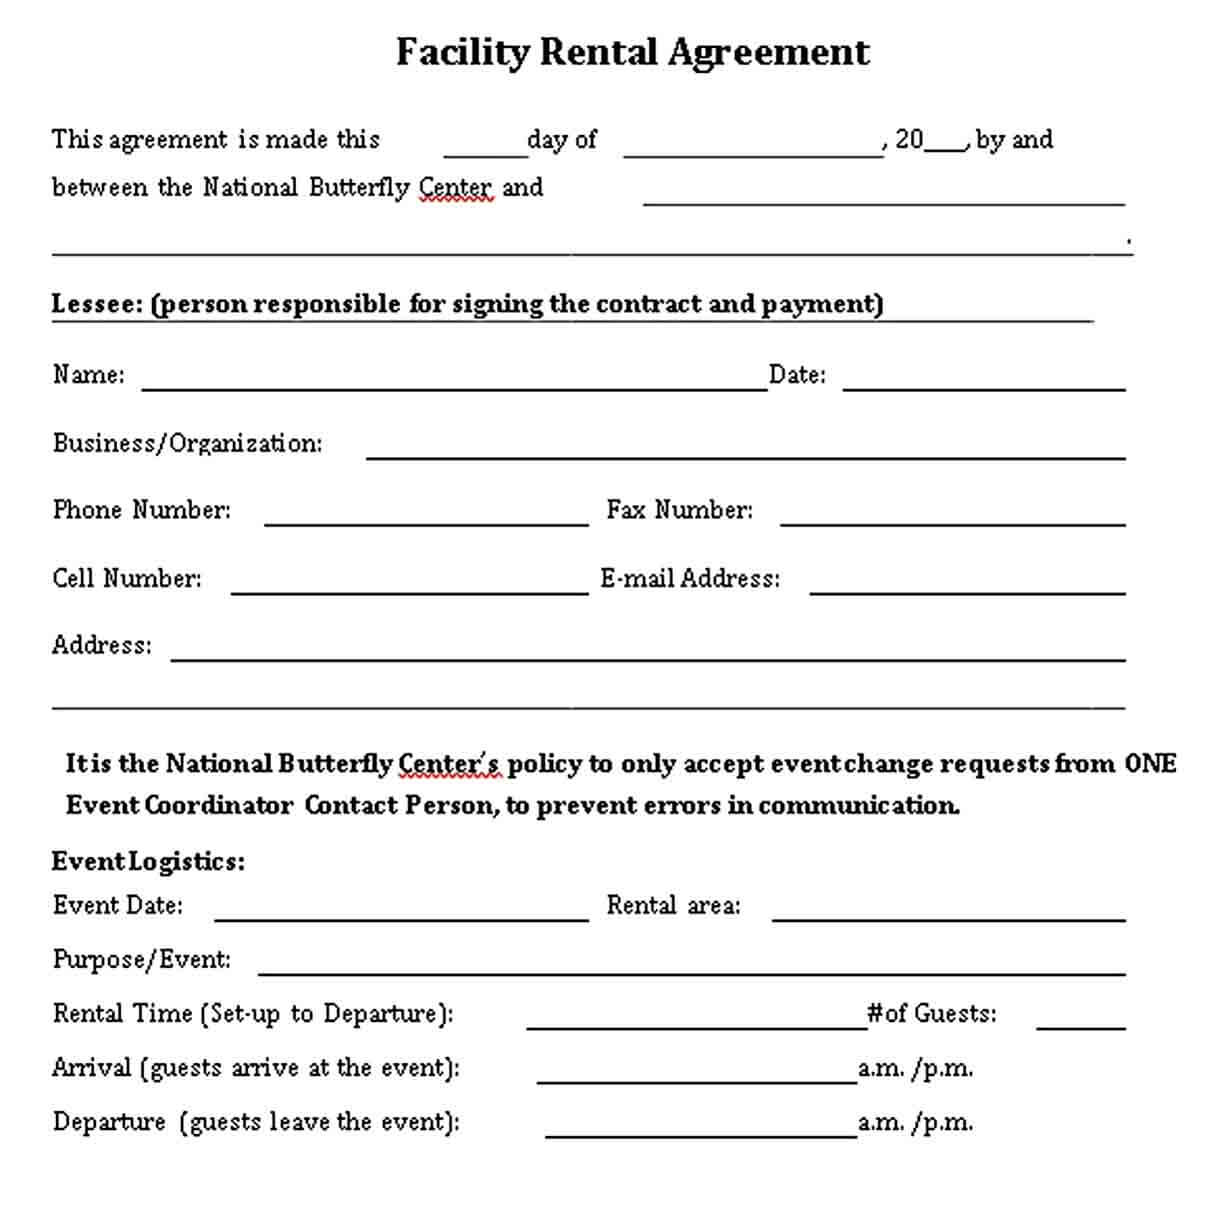 Sample National Butterfly Center Facility Rental Agreement